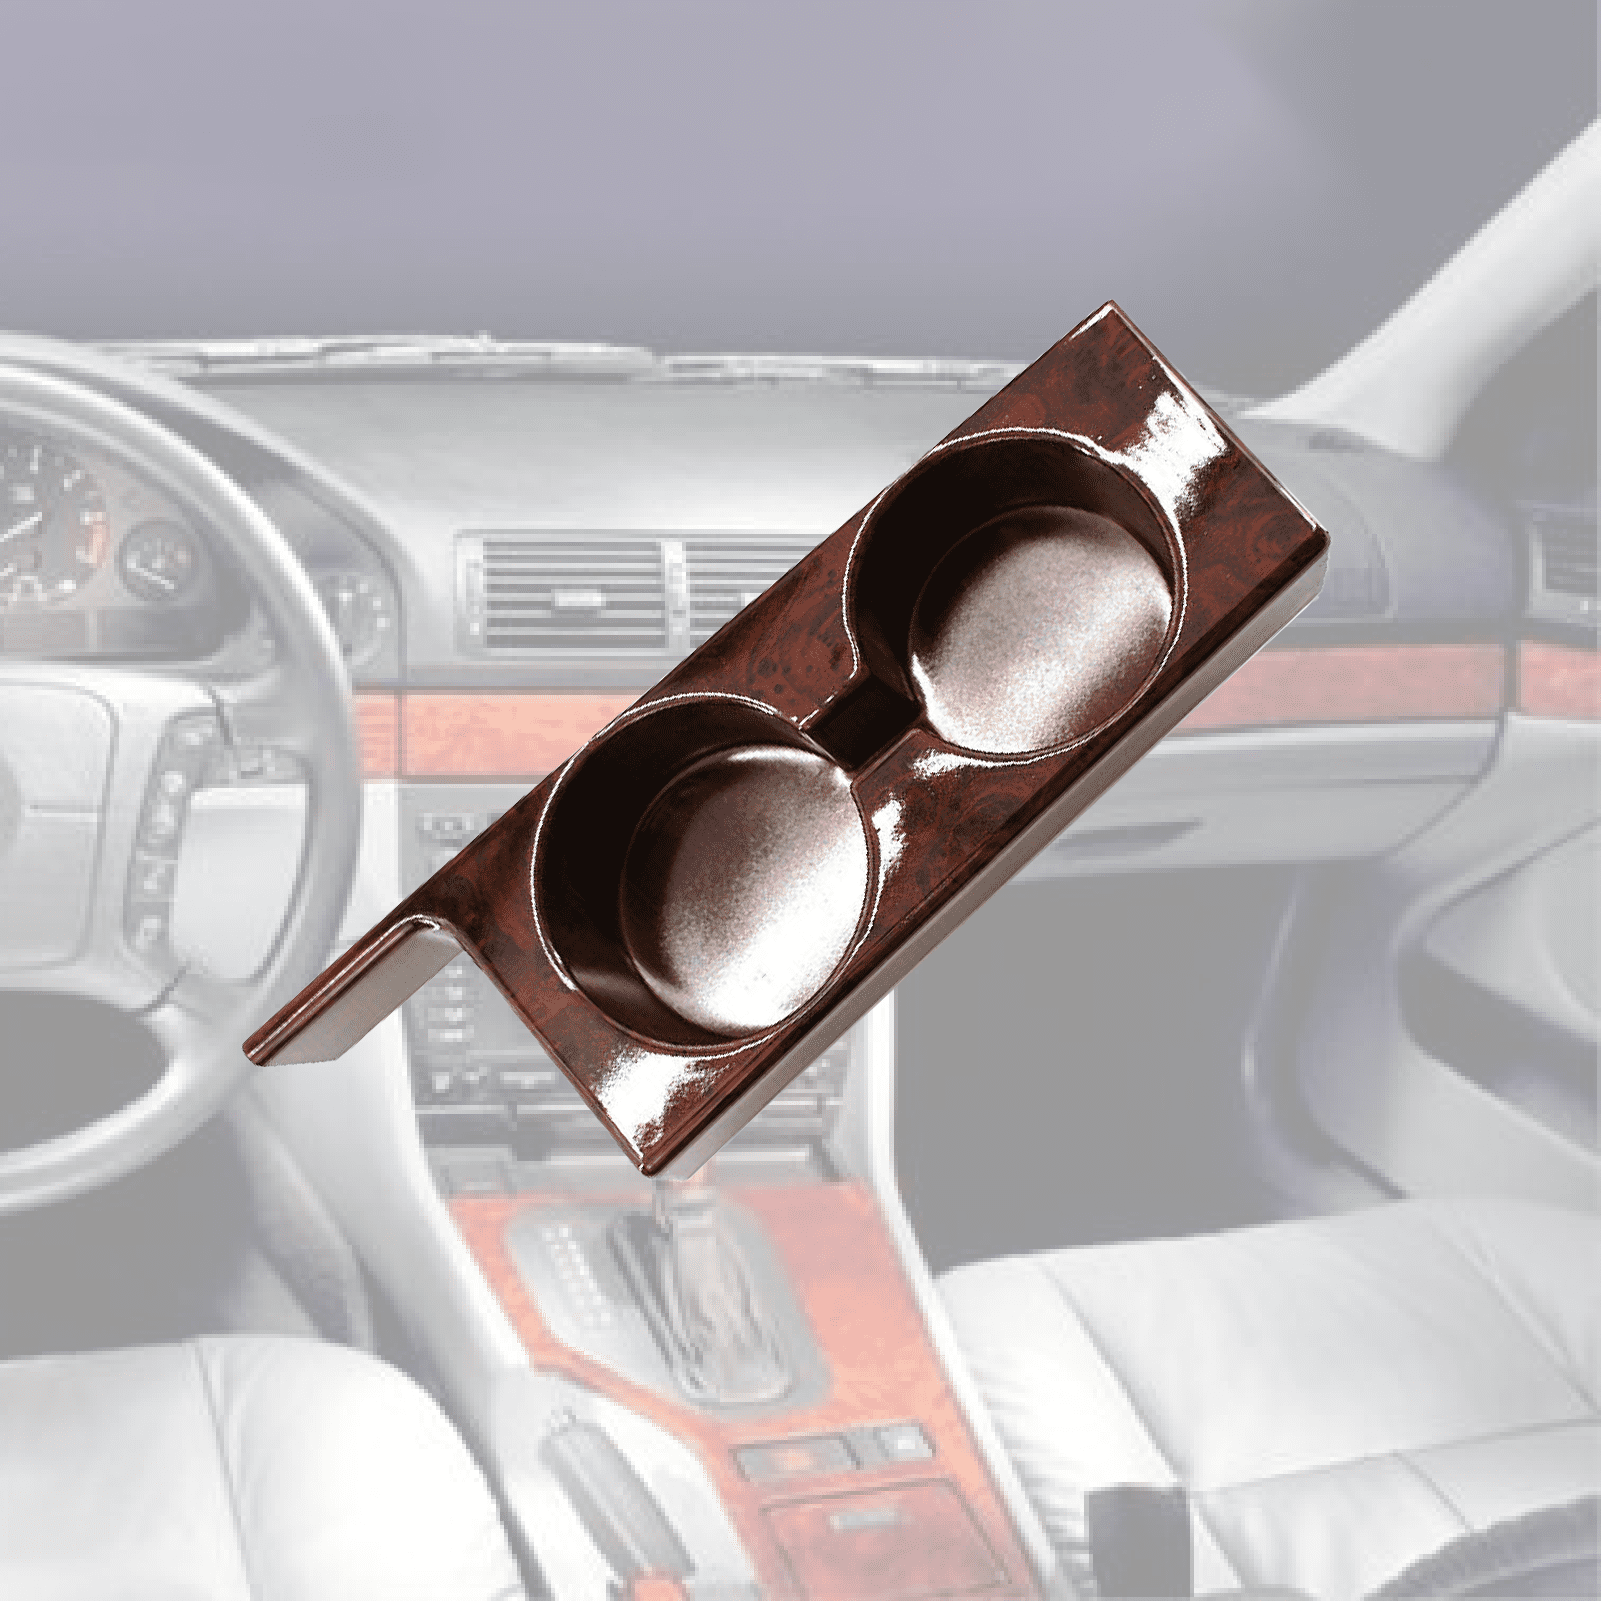 BMW 5 series E39 Cup Holder Can be wrapped in carbon fibre -  Österreich